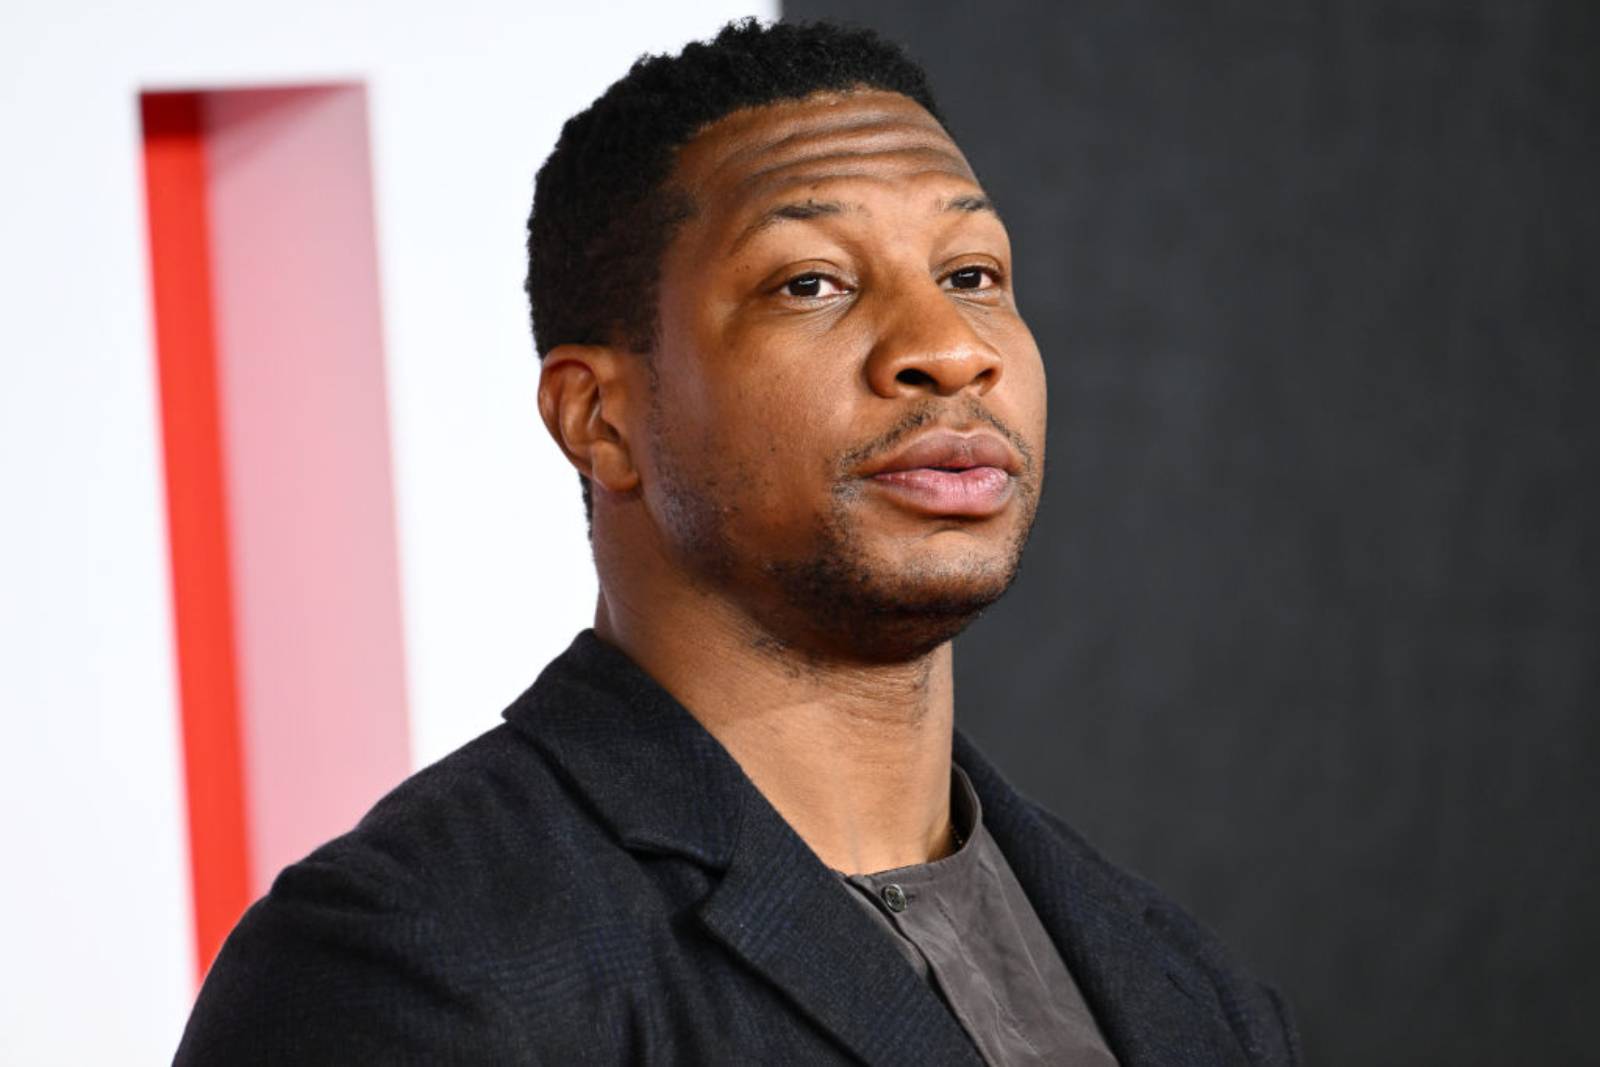 Jonathan Majors attends the "Creed III" European Premiere at Cineworld Leicester Square on February 15, 2023 in London, England. (Photo by Joe Maher/Getty Images)